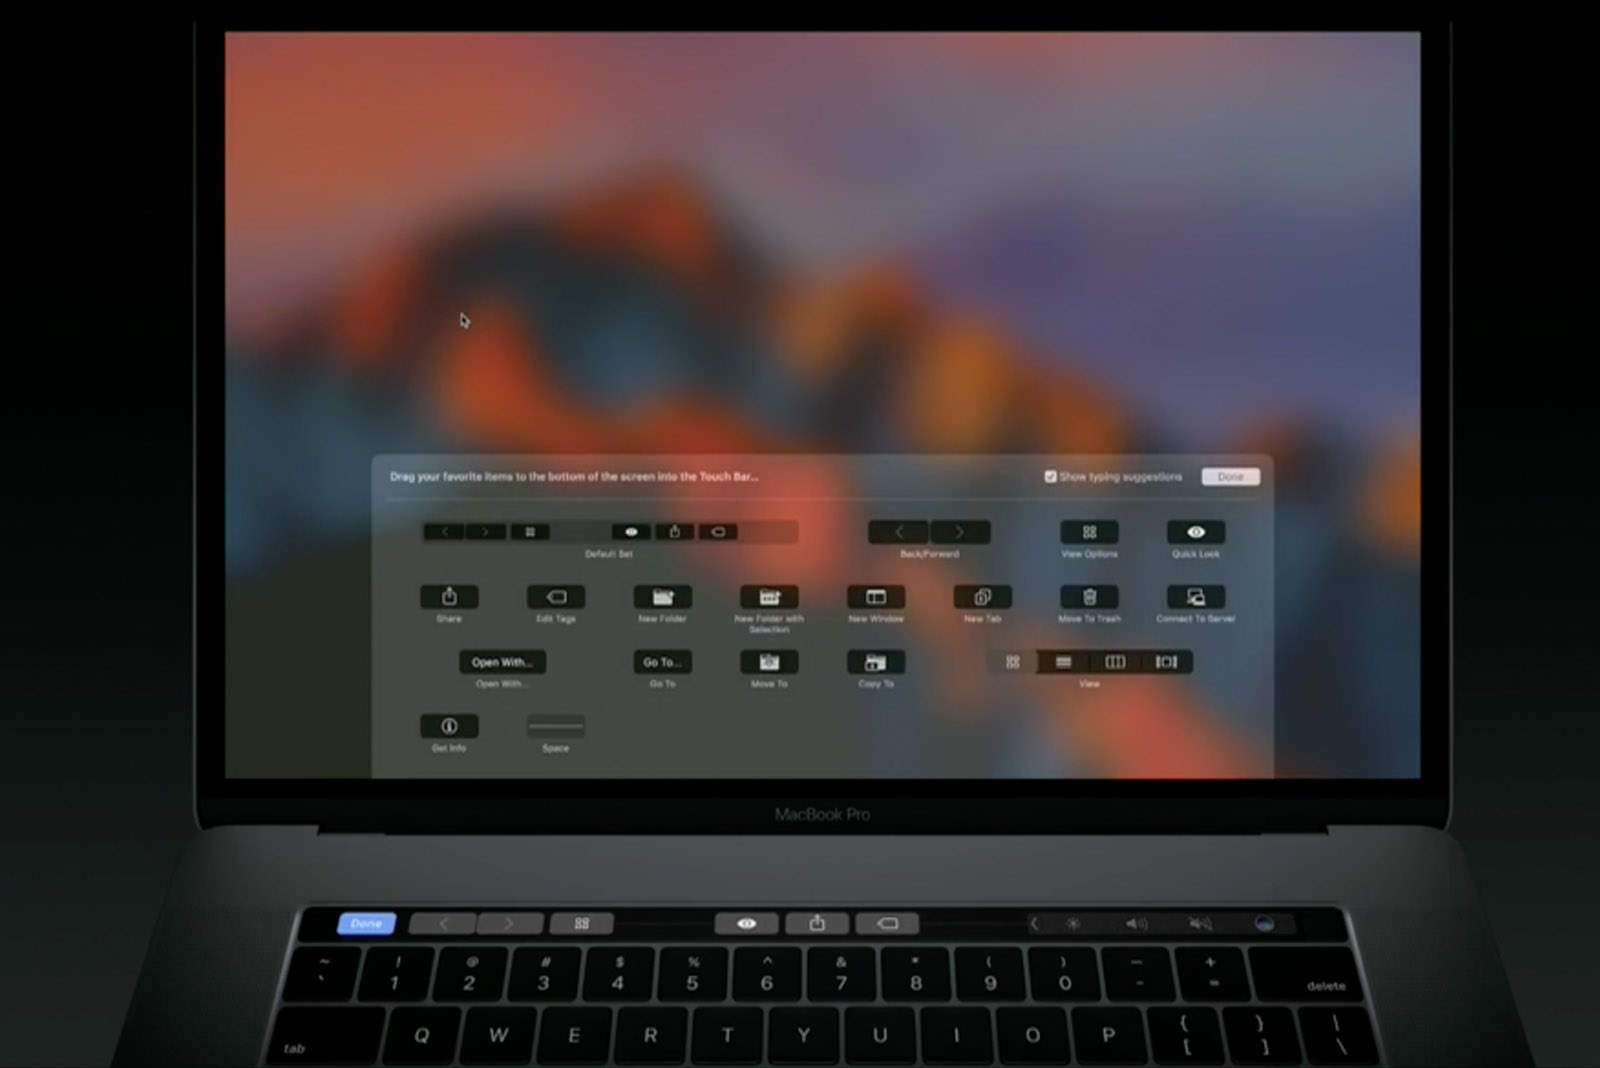 customized touch bar